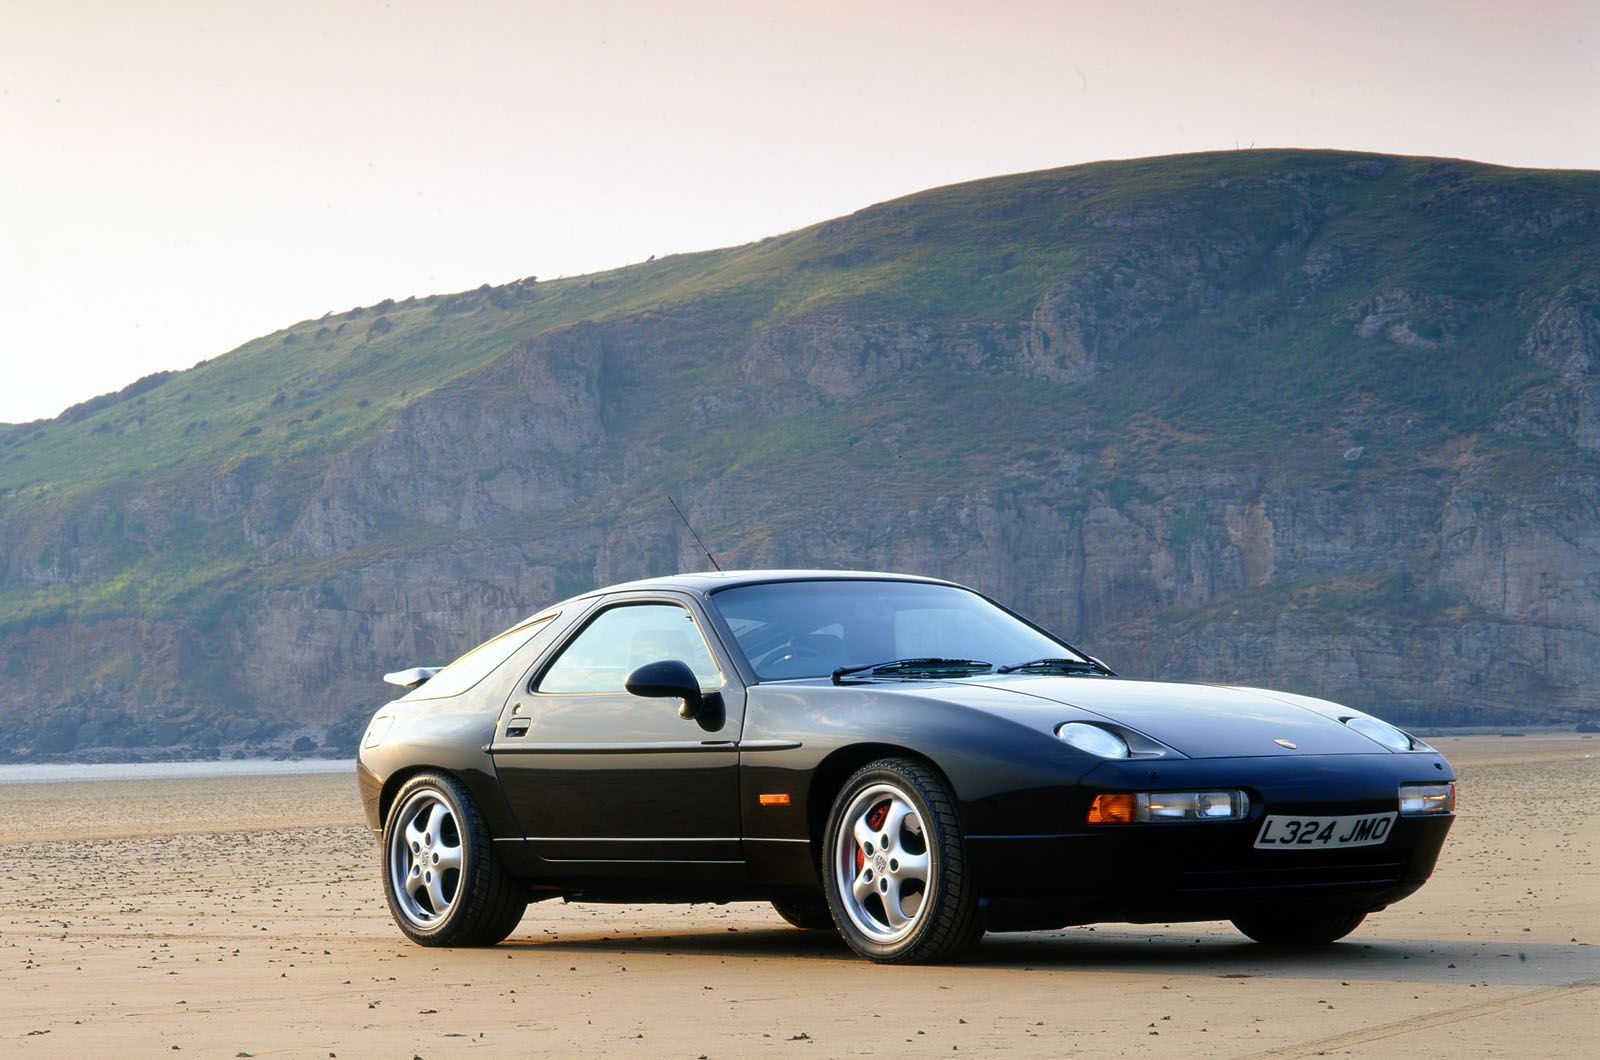 Porsche 928 with mountains in background